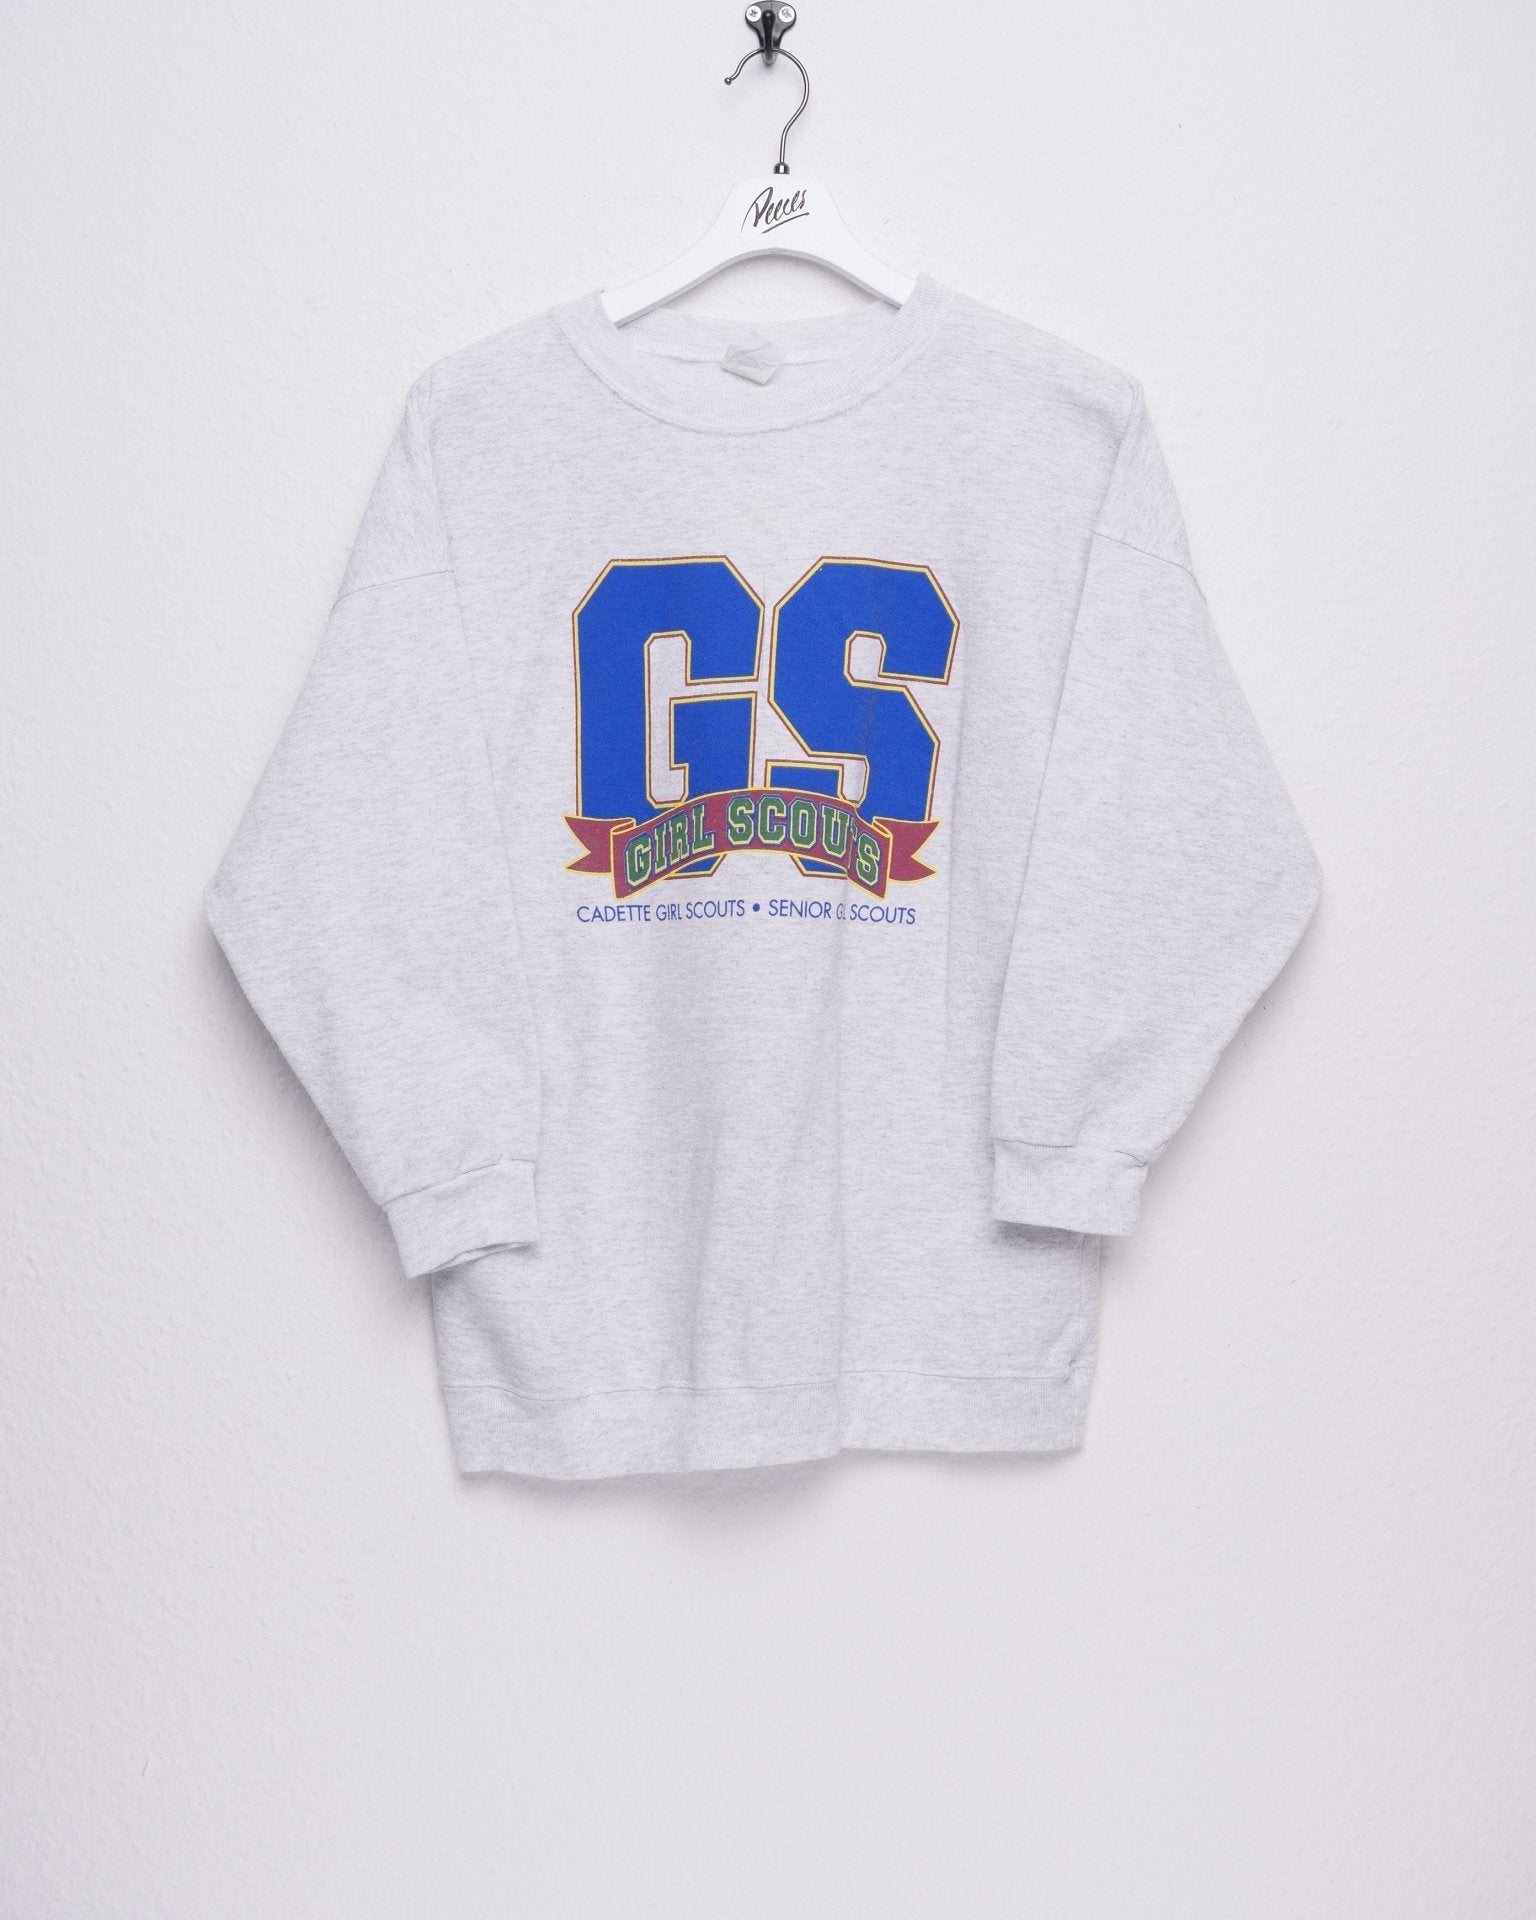 Girl Scouts printed Logo Vintage Sweater - Peeces